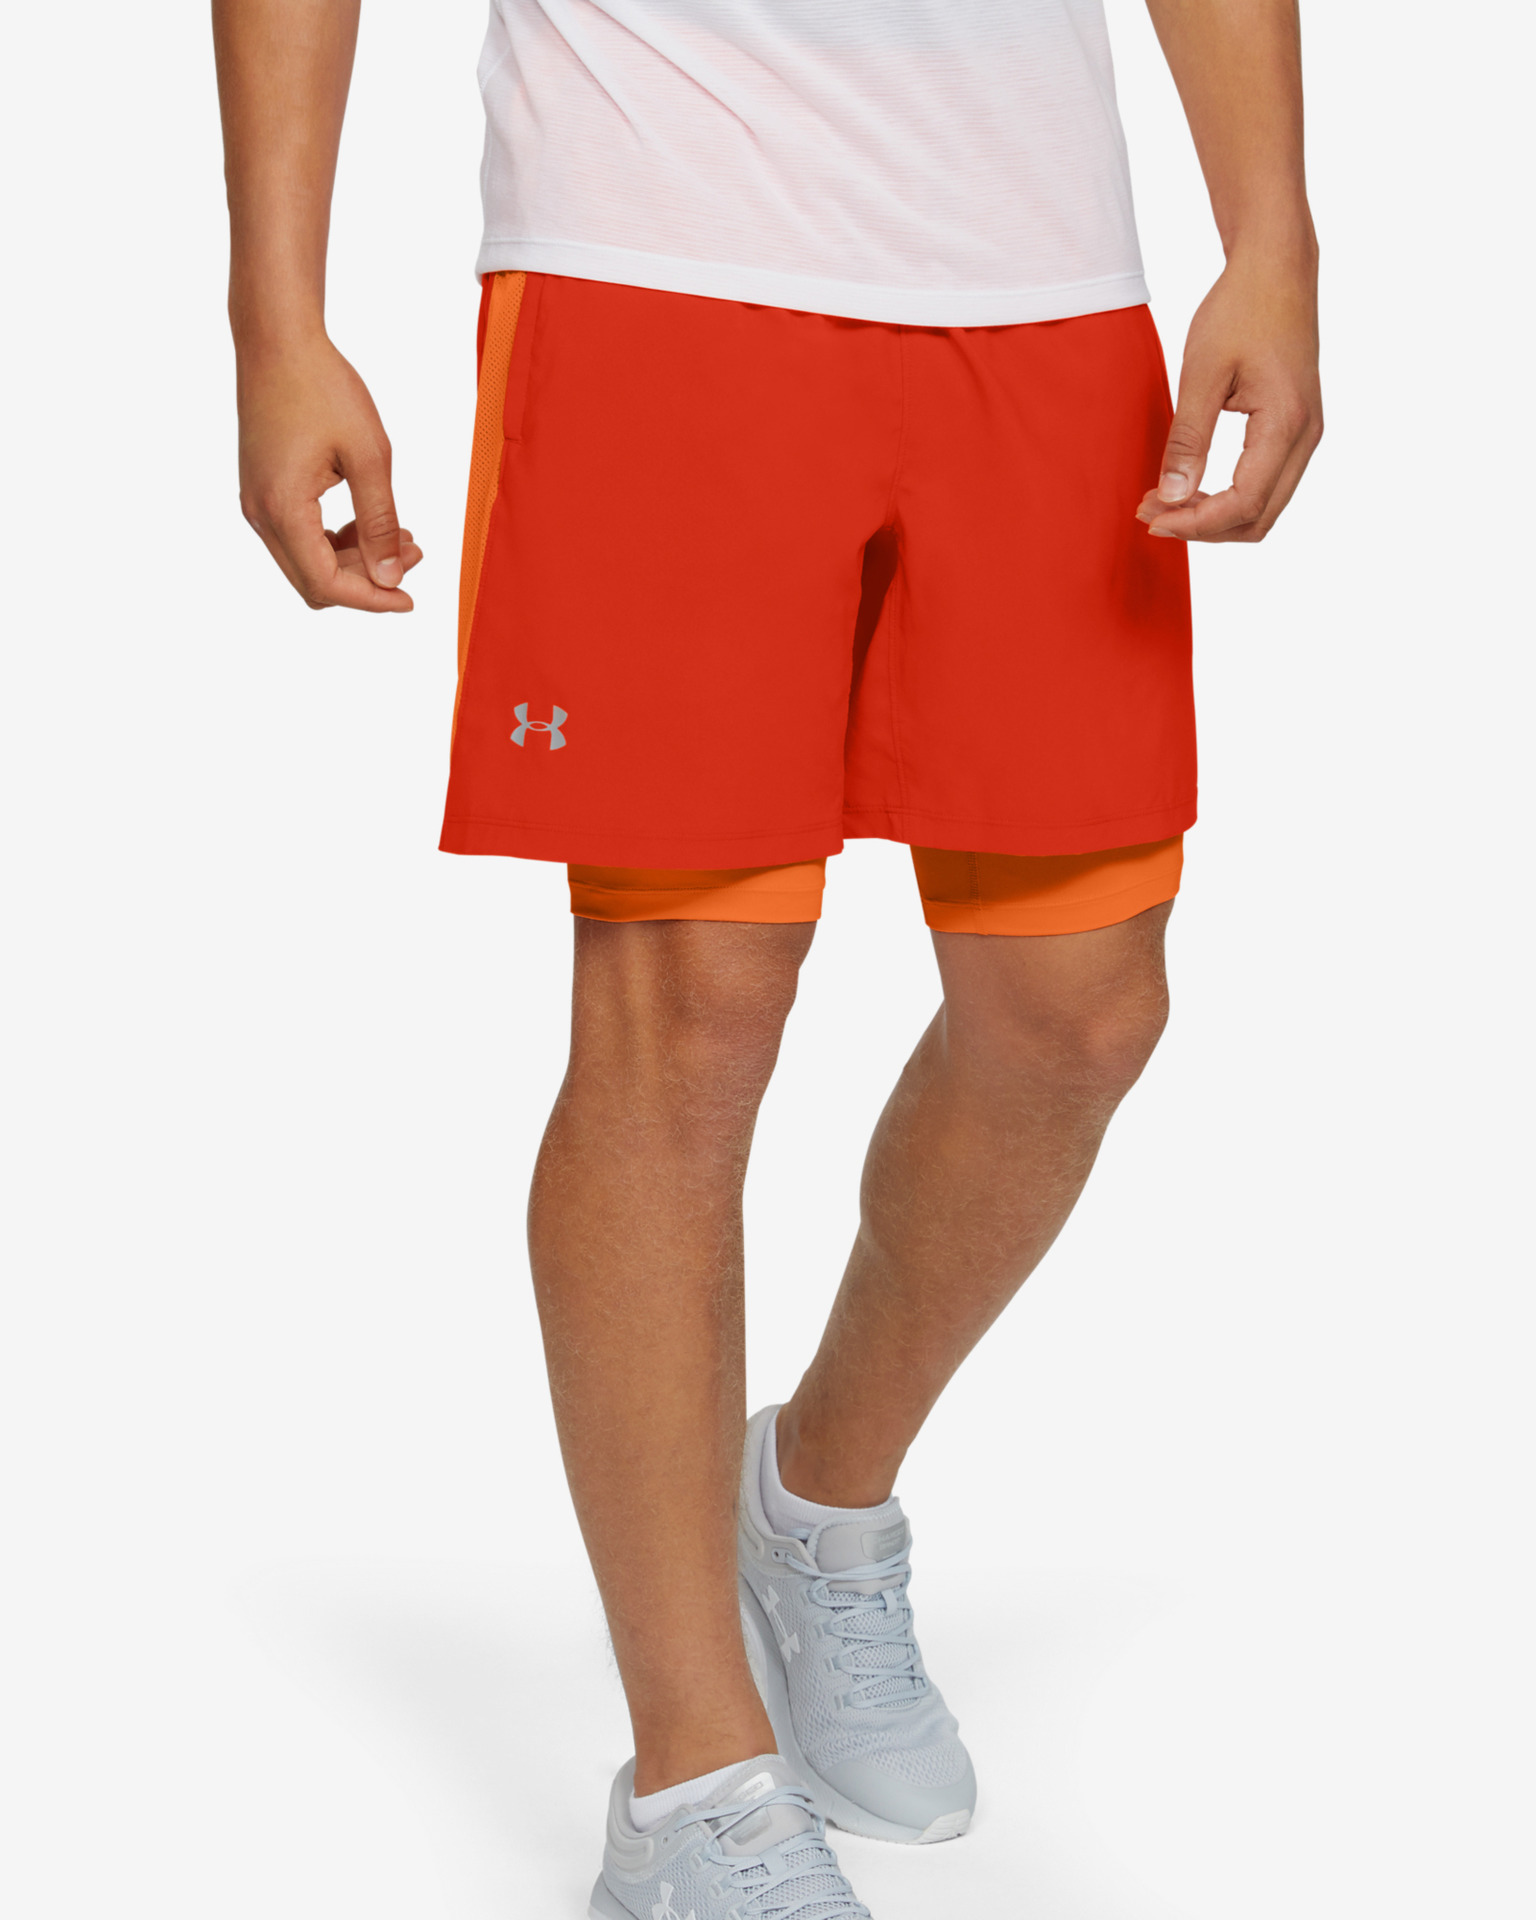 Under Armour - Launch SW 2-in-1 Short pants